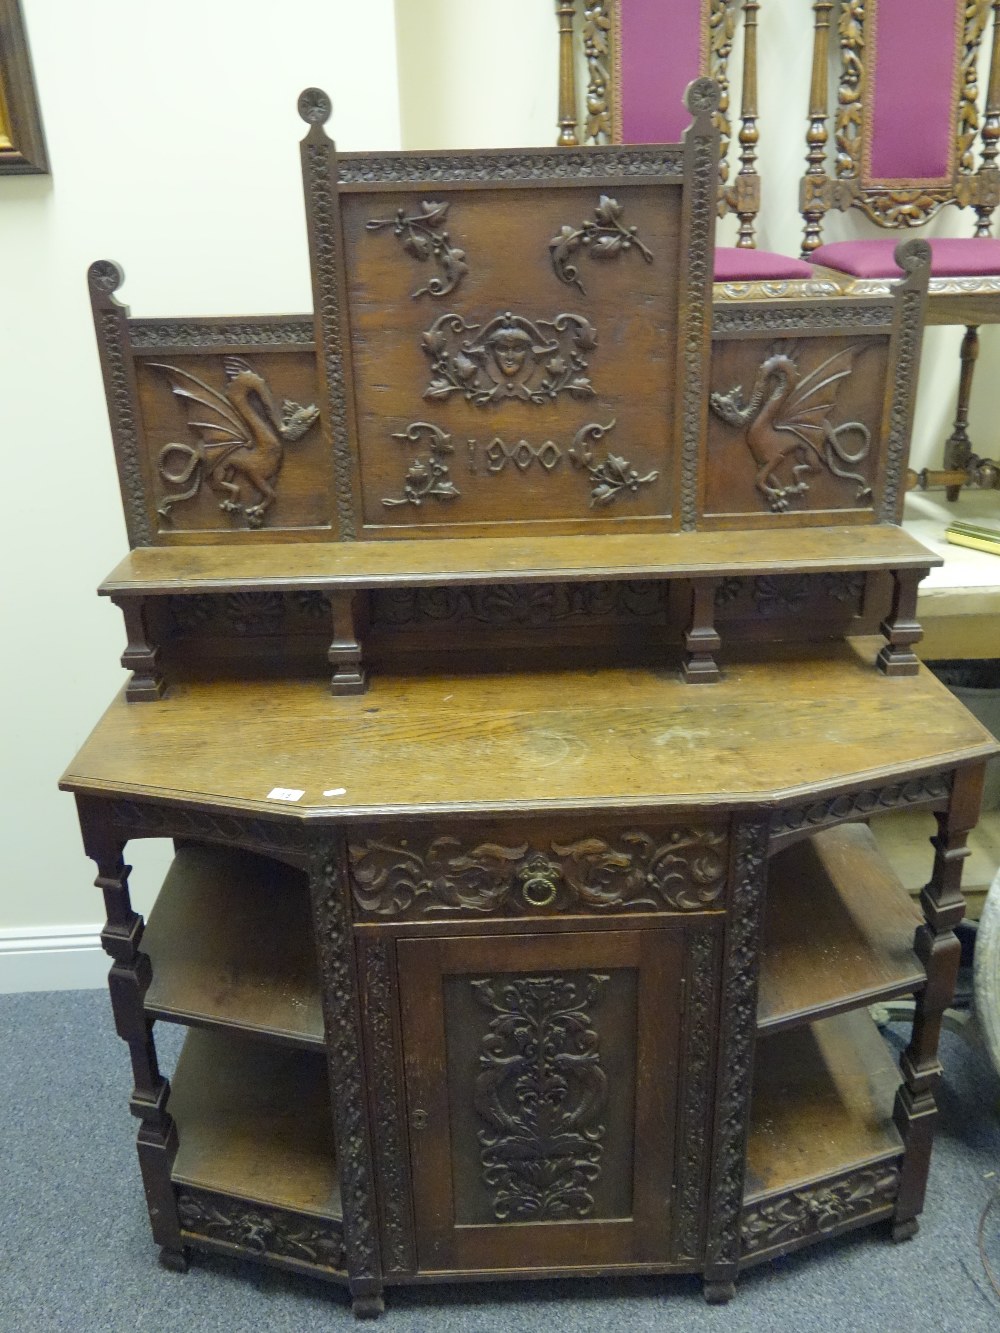 Delicate Arts & Crafts period profusely carved Chiffonier with a carved decorative back and 2 panels